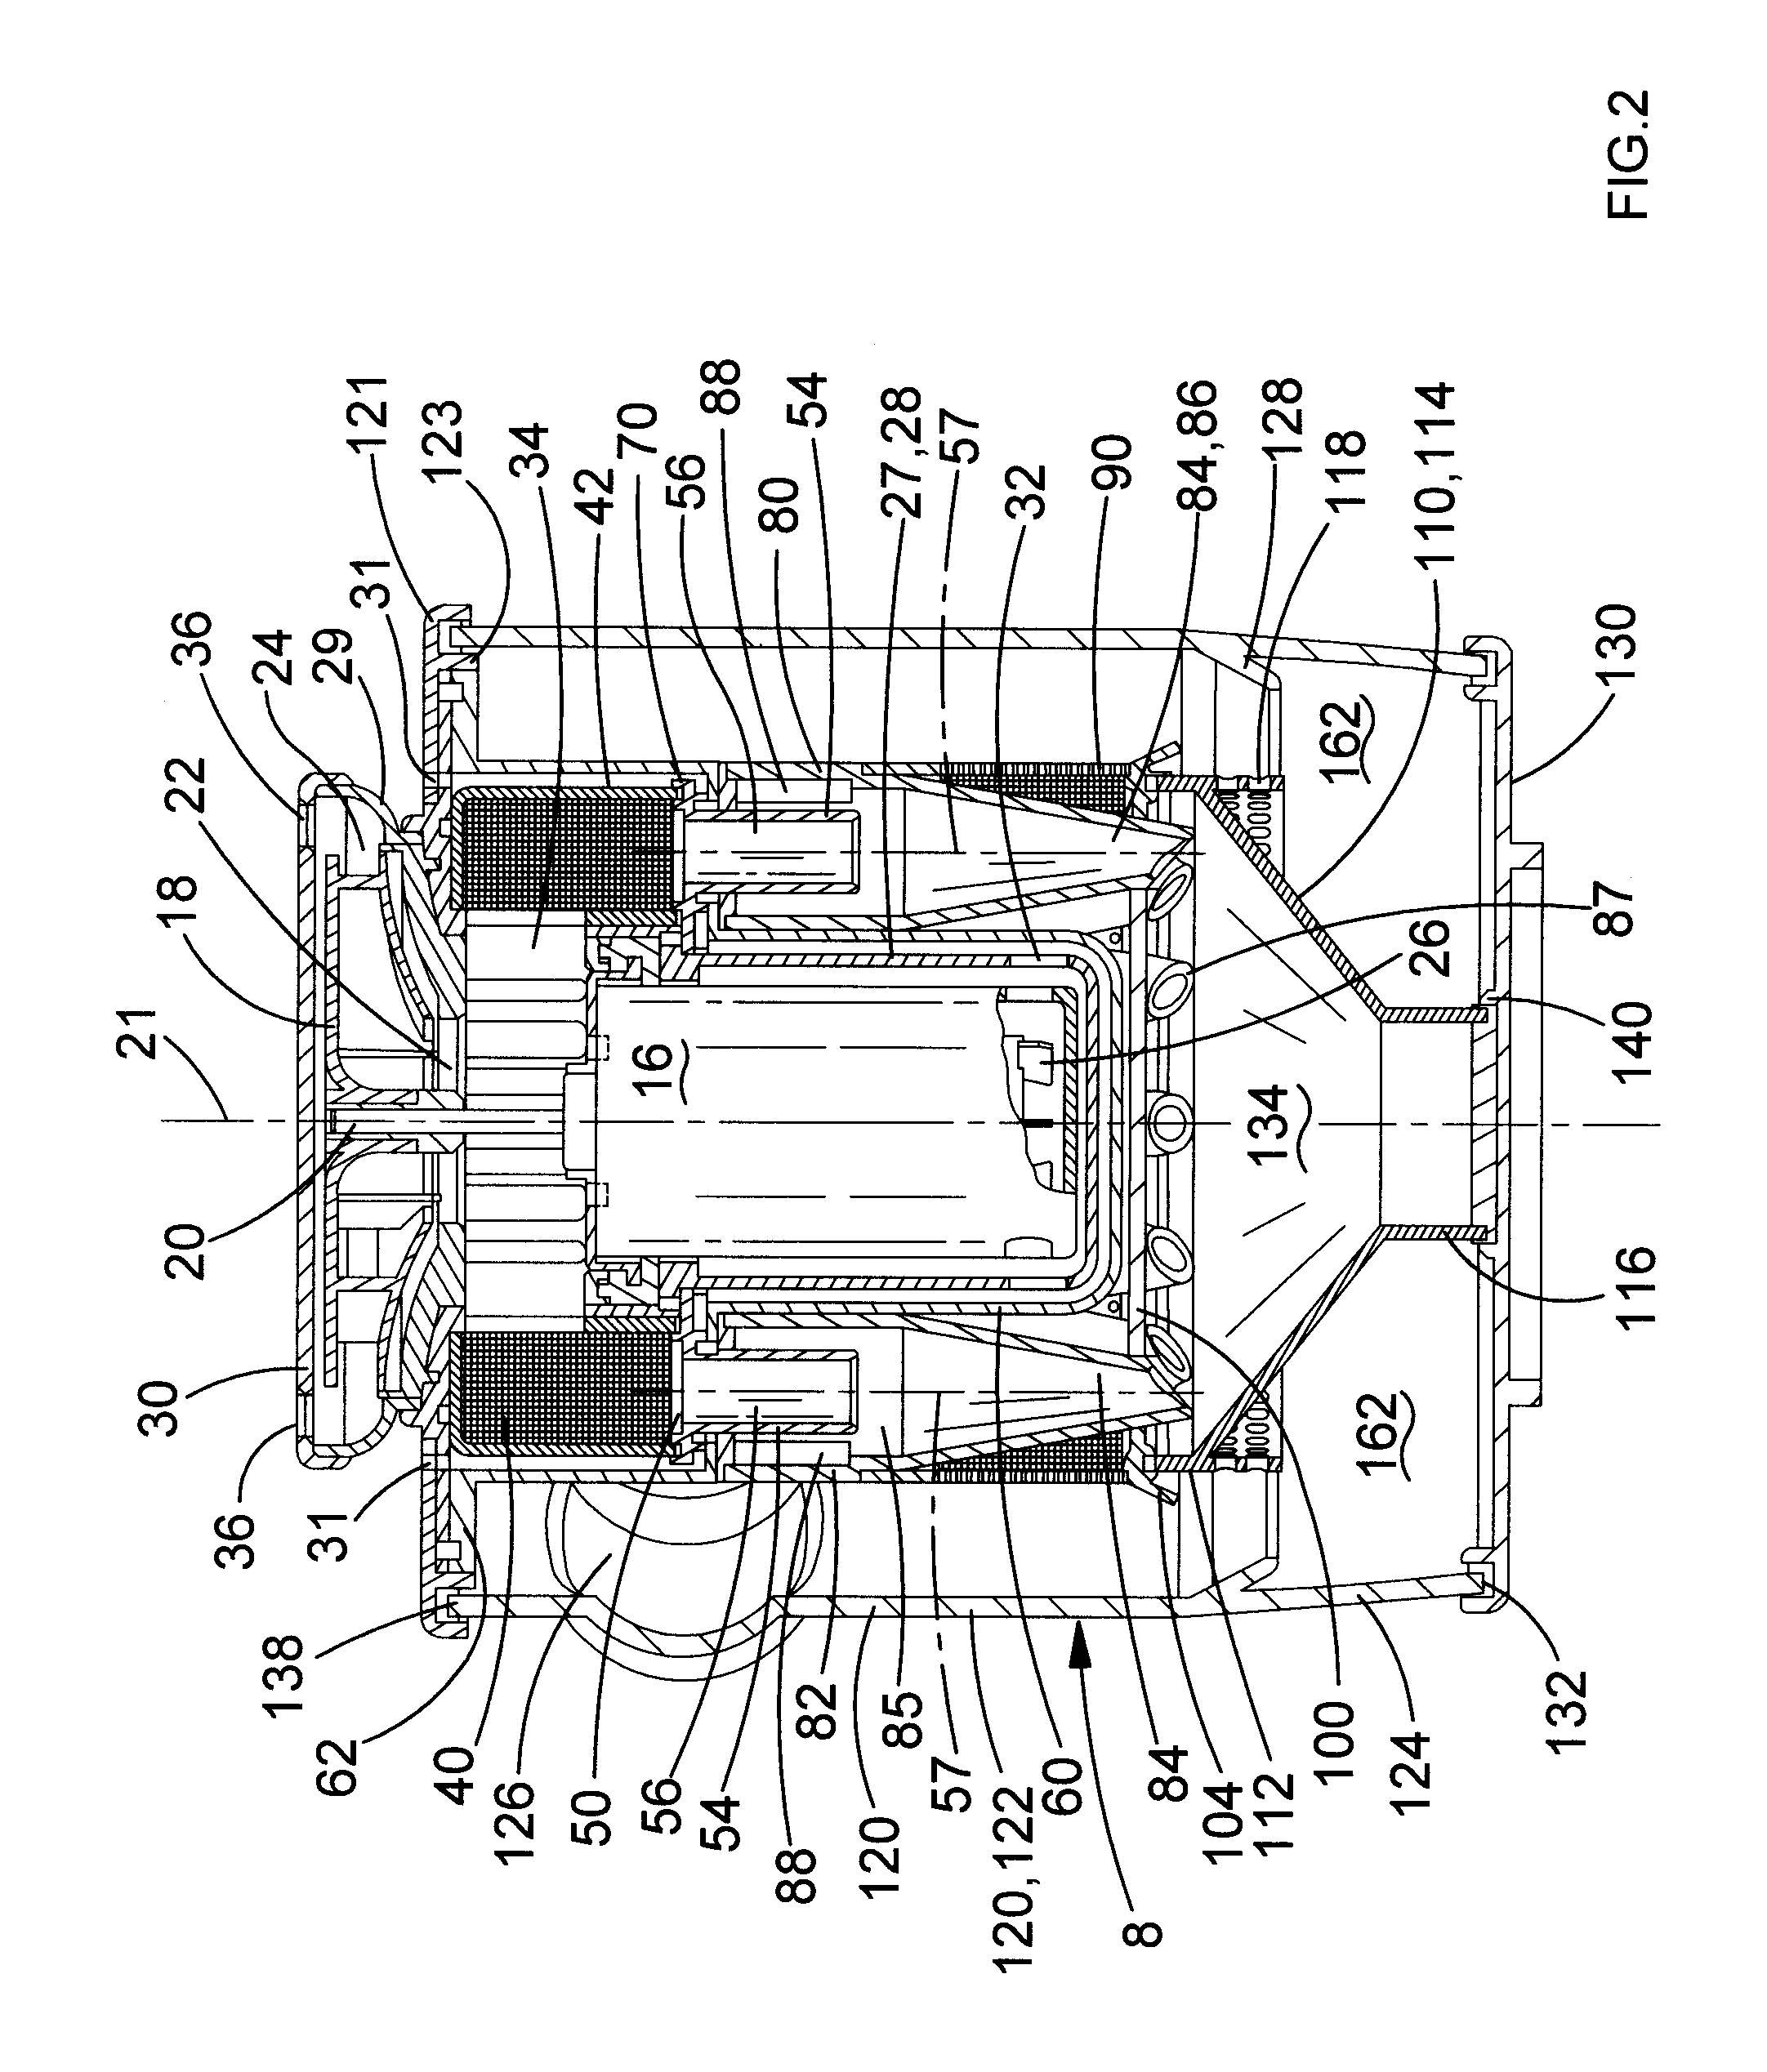 Cyclonic separation apparatus for a vacuum cleaner